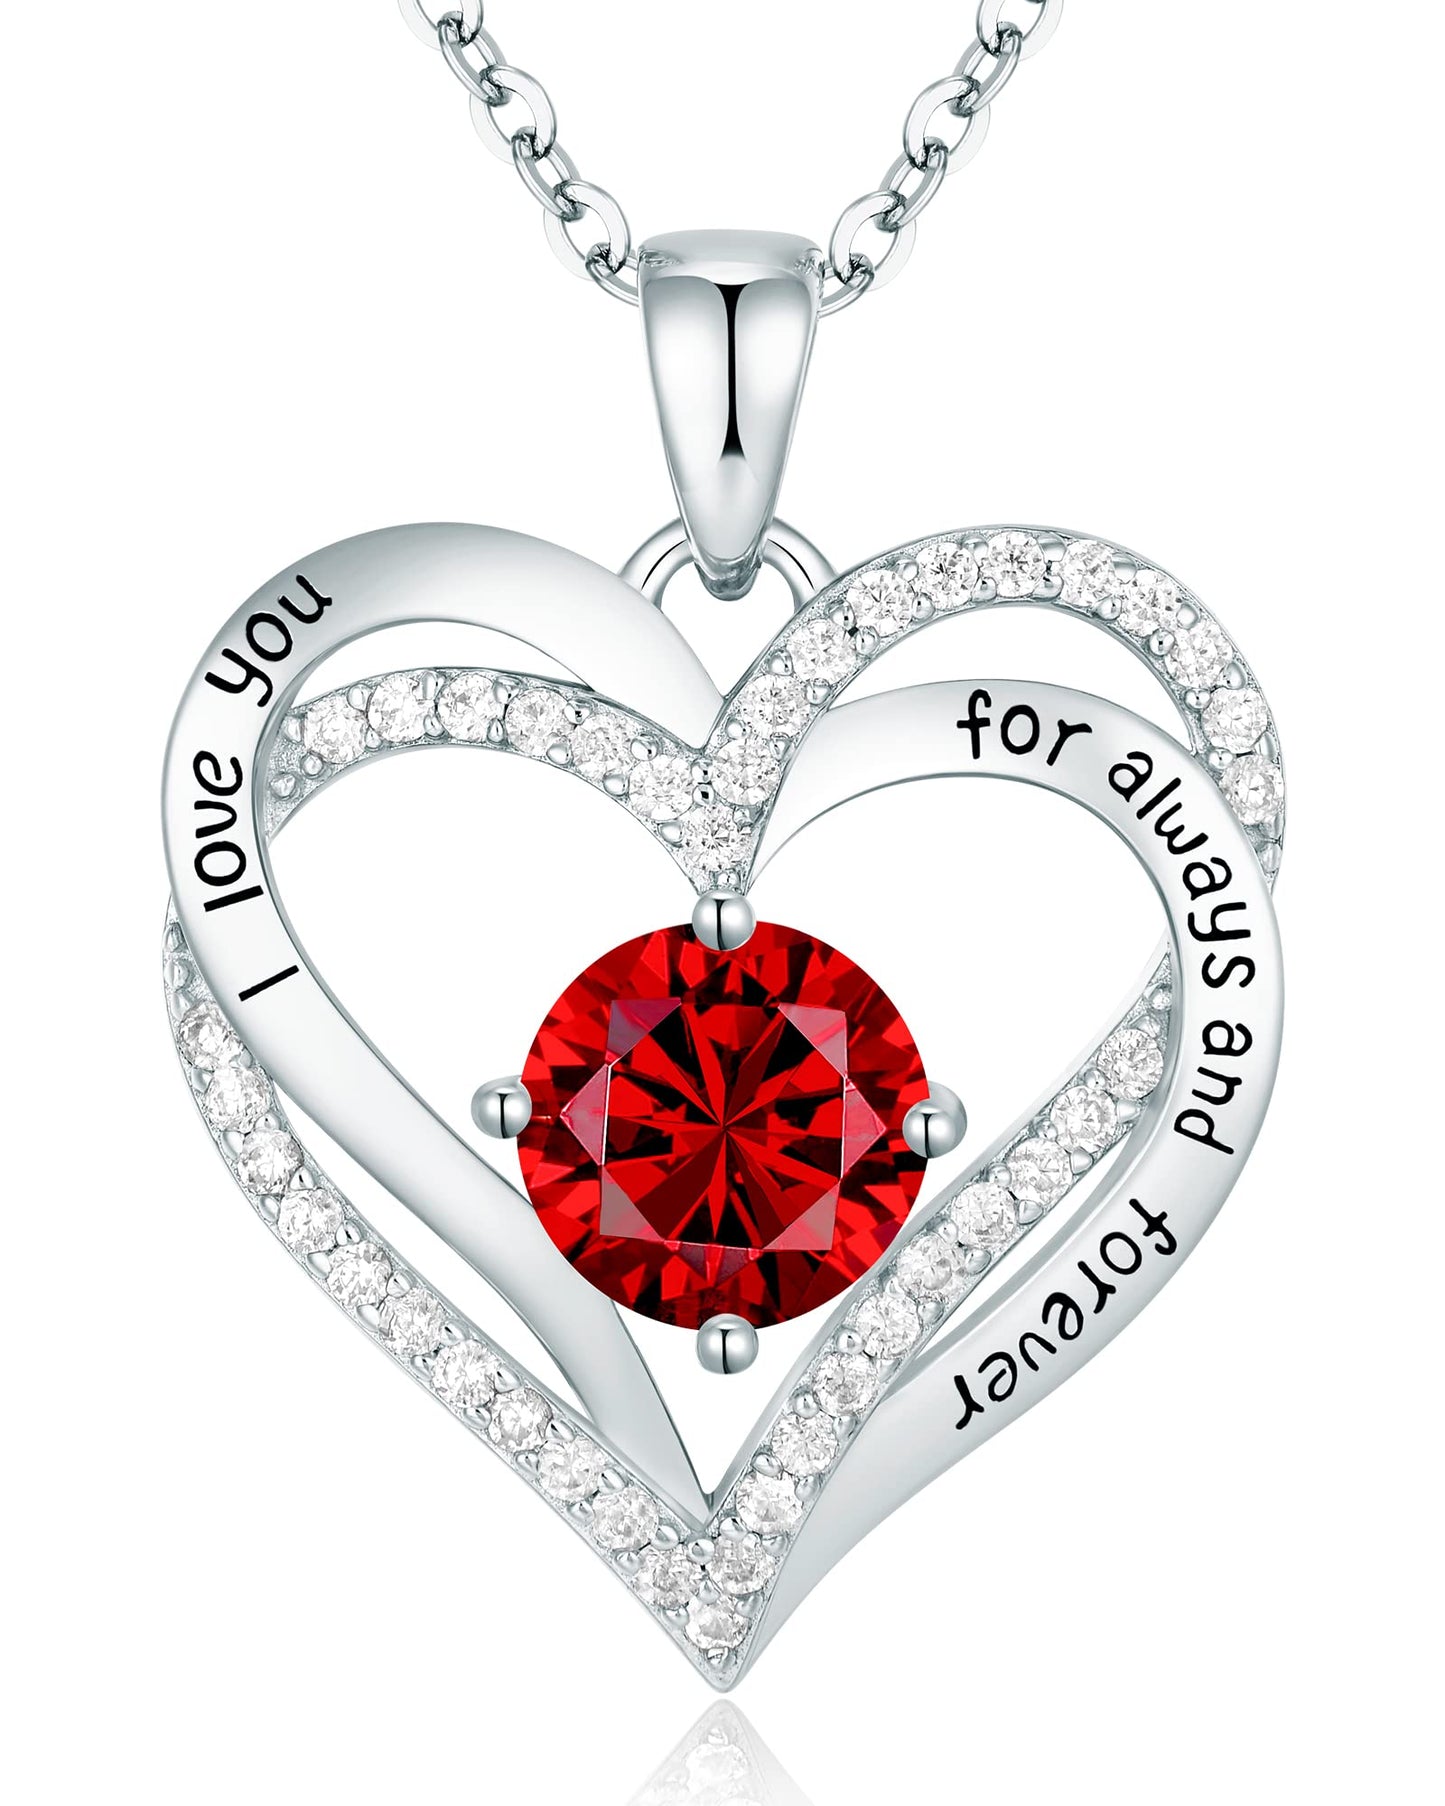 I Love You Necklace Birthstone Necklace For Your Lover